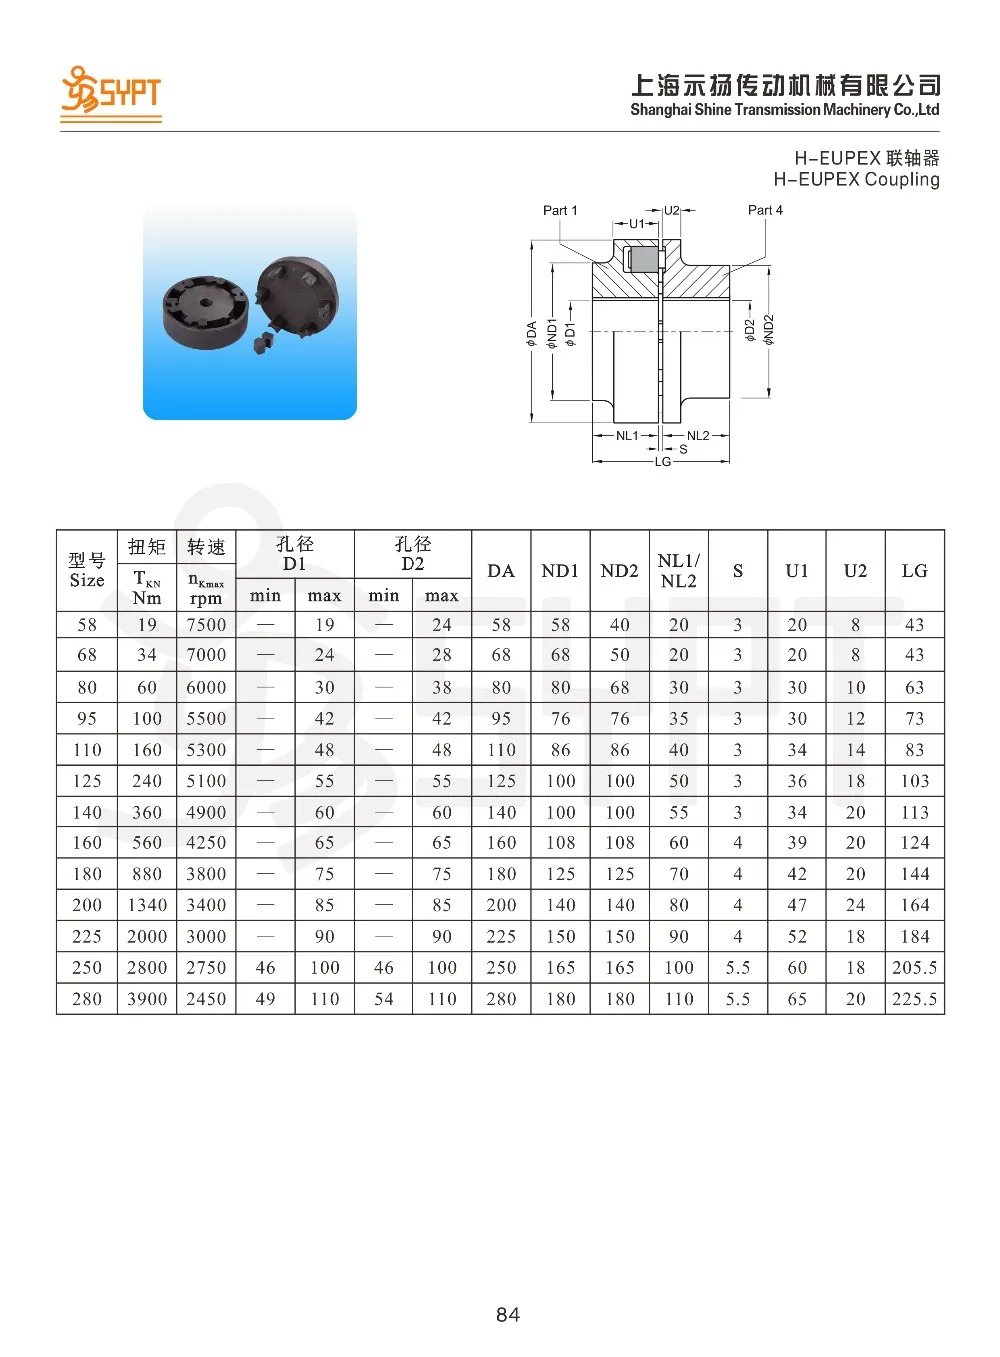 30 Coupling Outer Diameter:20 VXB Brand Japan MJC-20-WH 3/16 inch to 11mm Jaw-Type Flexible Coupling Coupling Bore 2 Diameter:11mm Coupling Length 